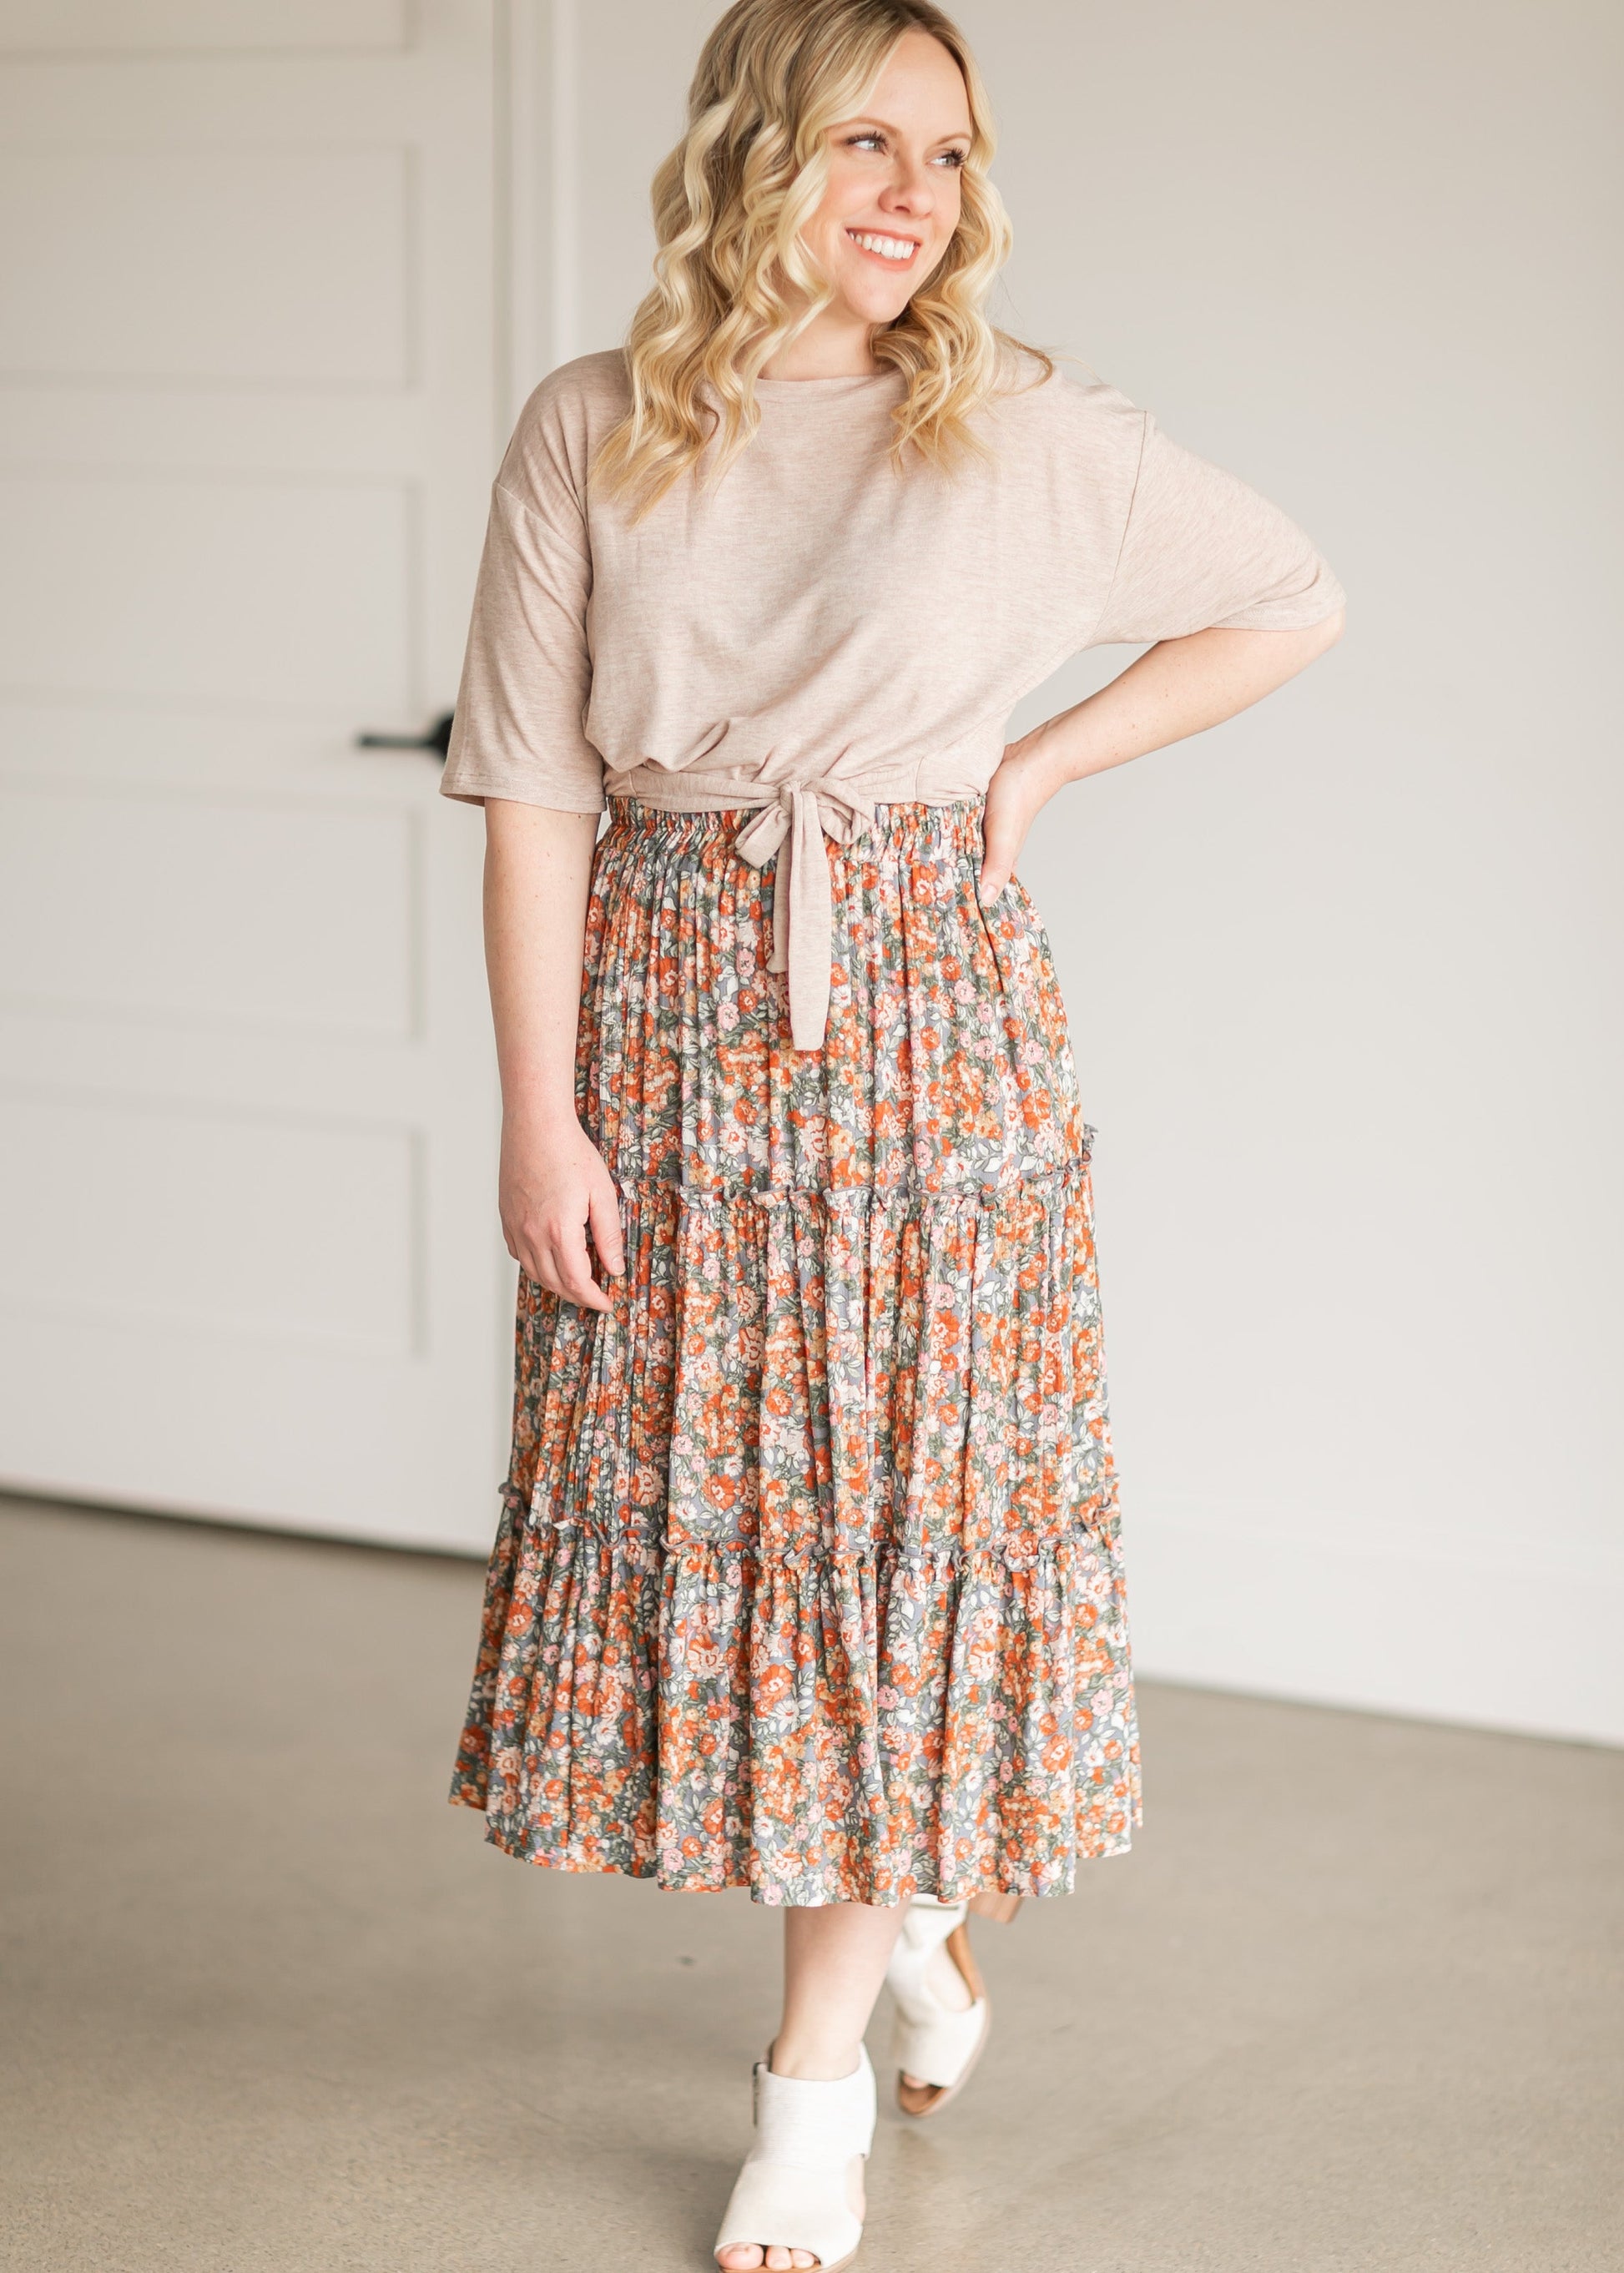 Gray Pull On Floral Tiered Midi Skirt IC Skirts